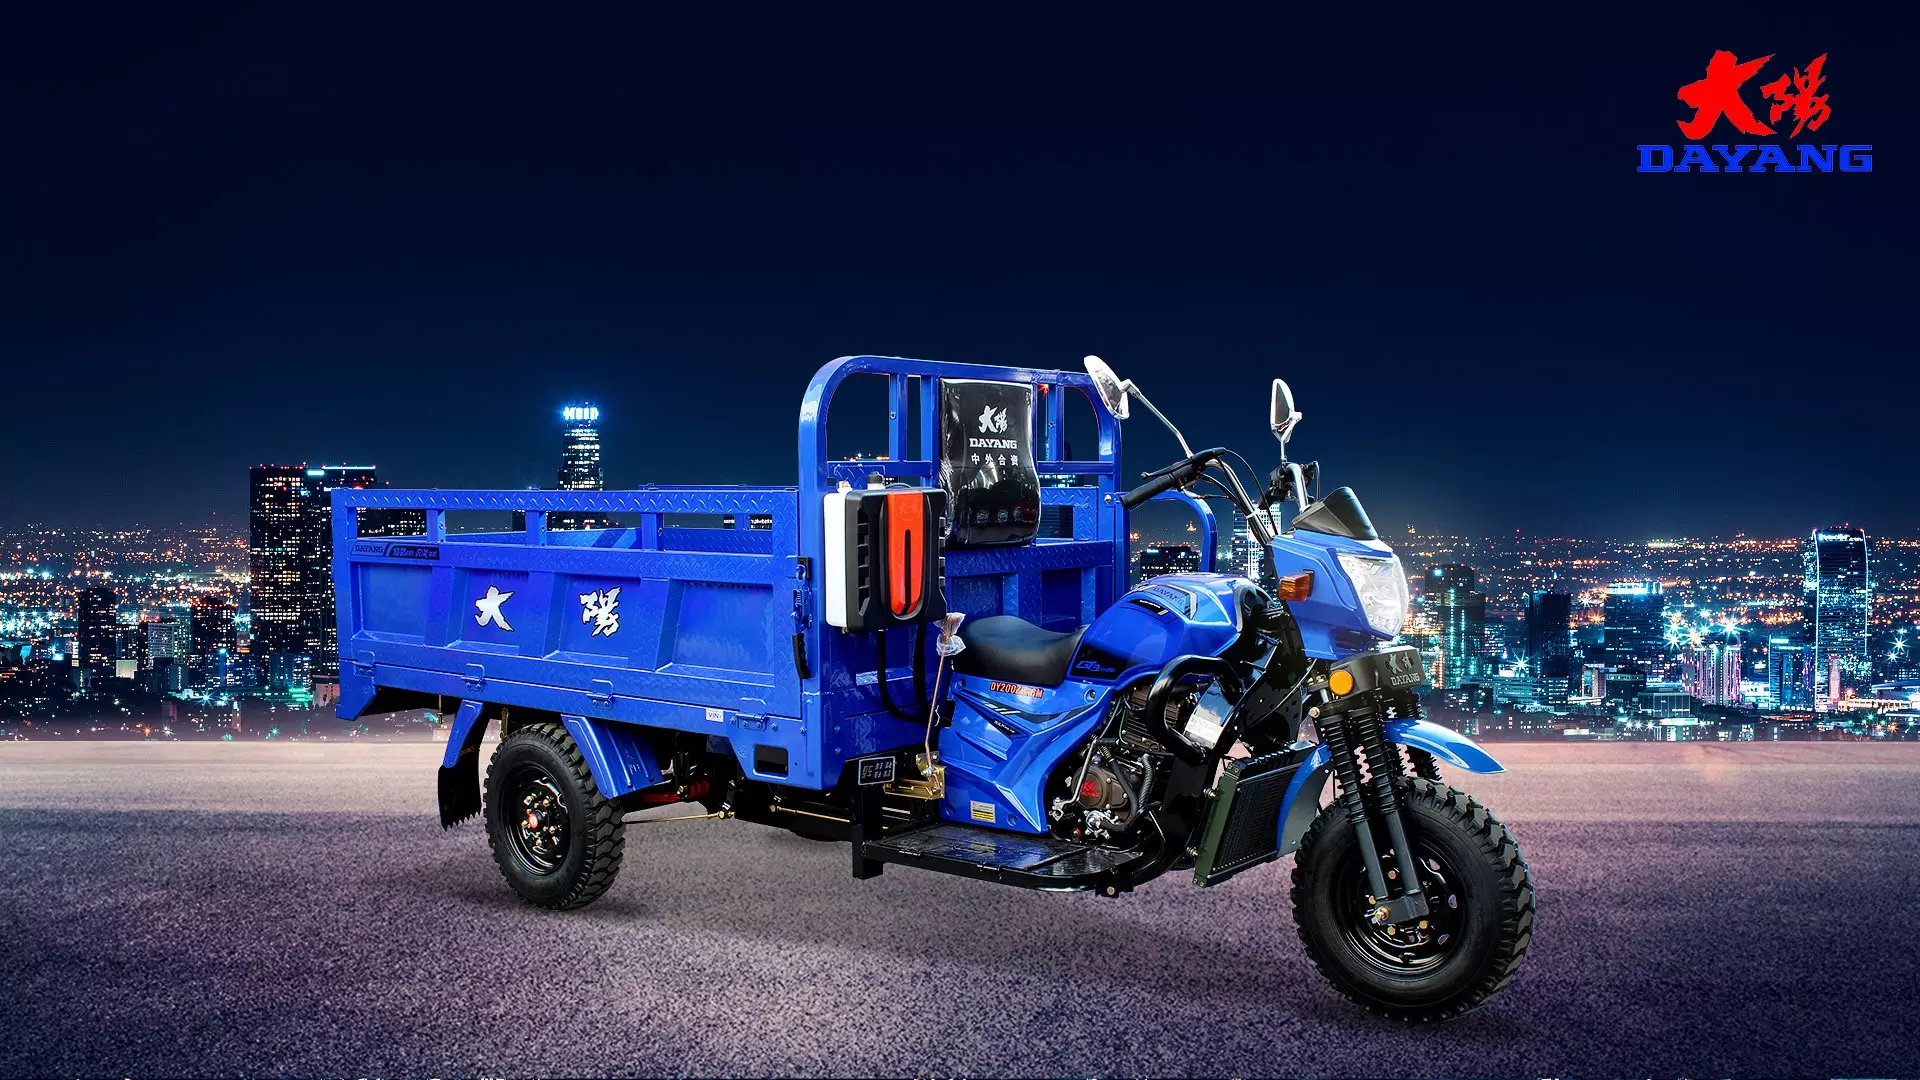 High popularity 2022 adult new petrol gasoline motorized tricycles en peru 250cc cargo power  motor tricycle